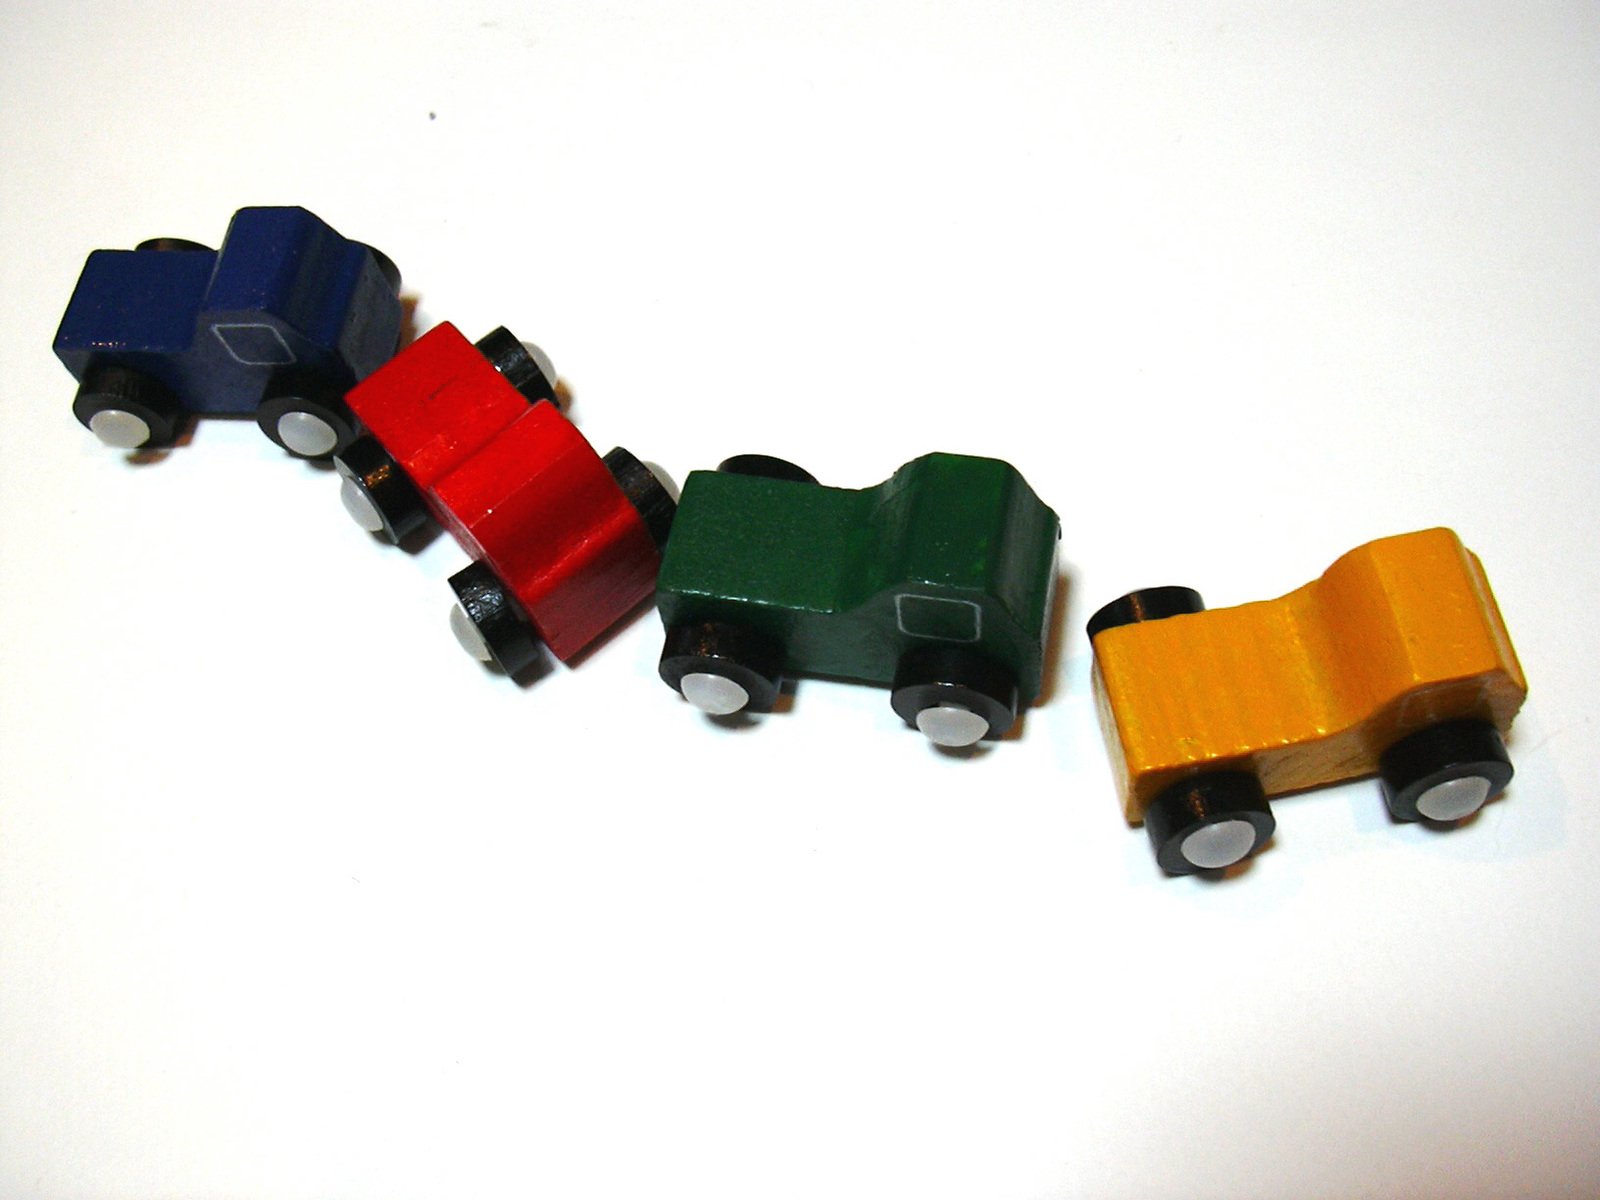 wooden toy vehicles are in the form of a car